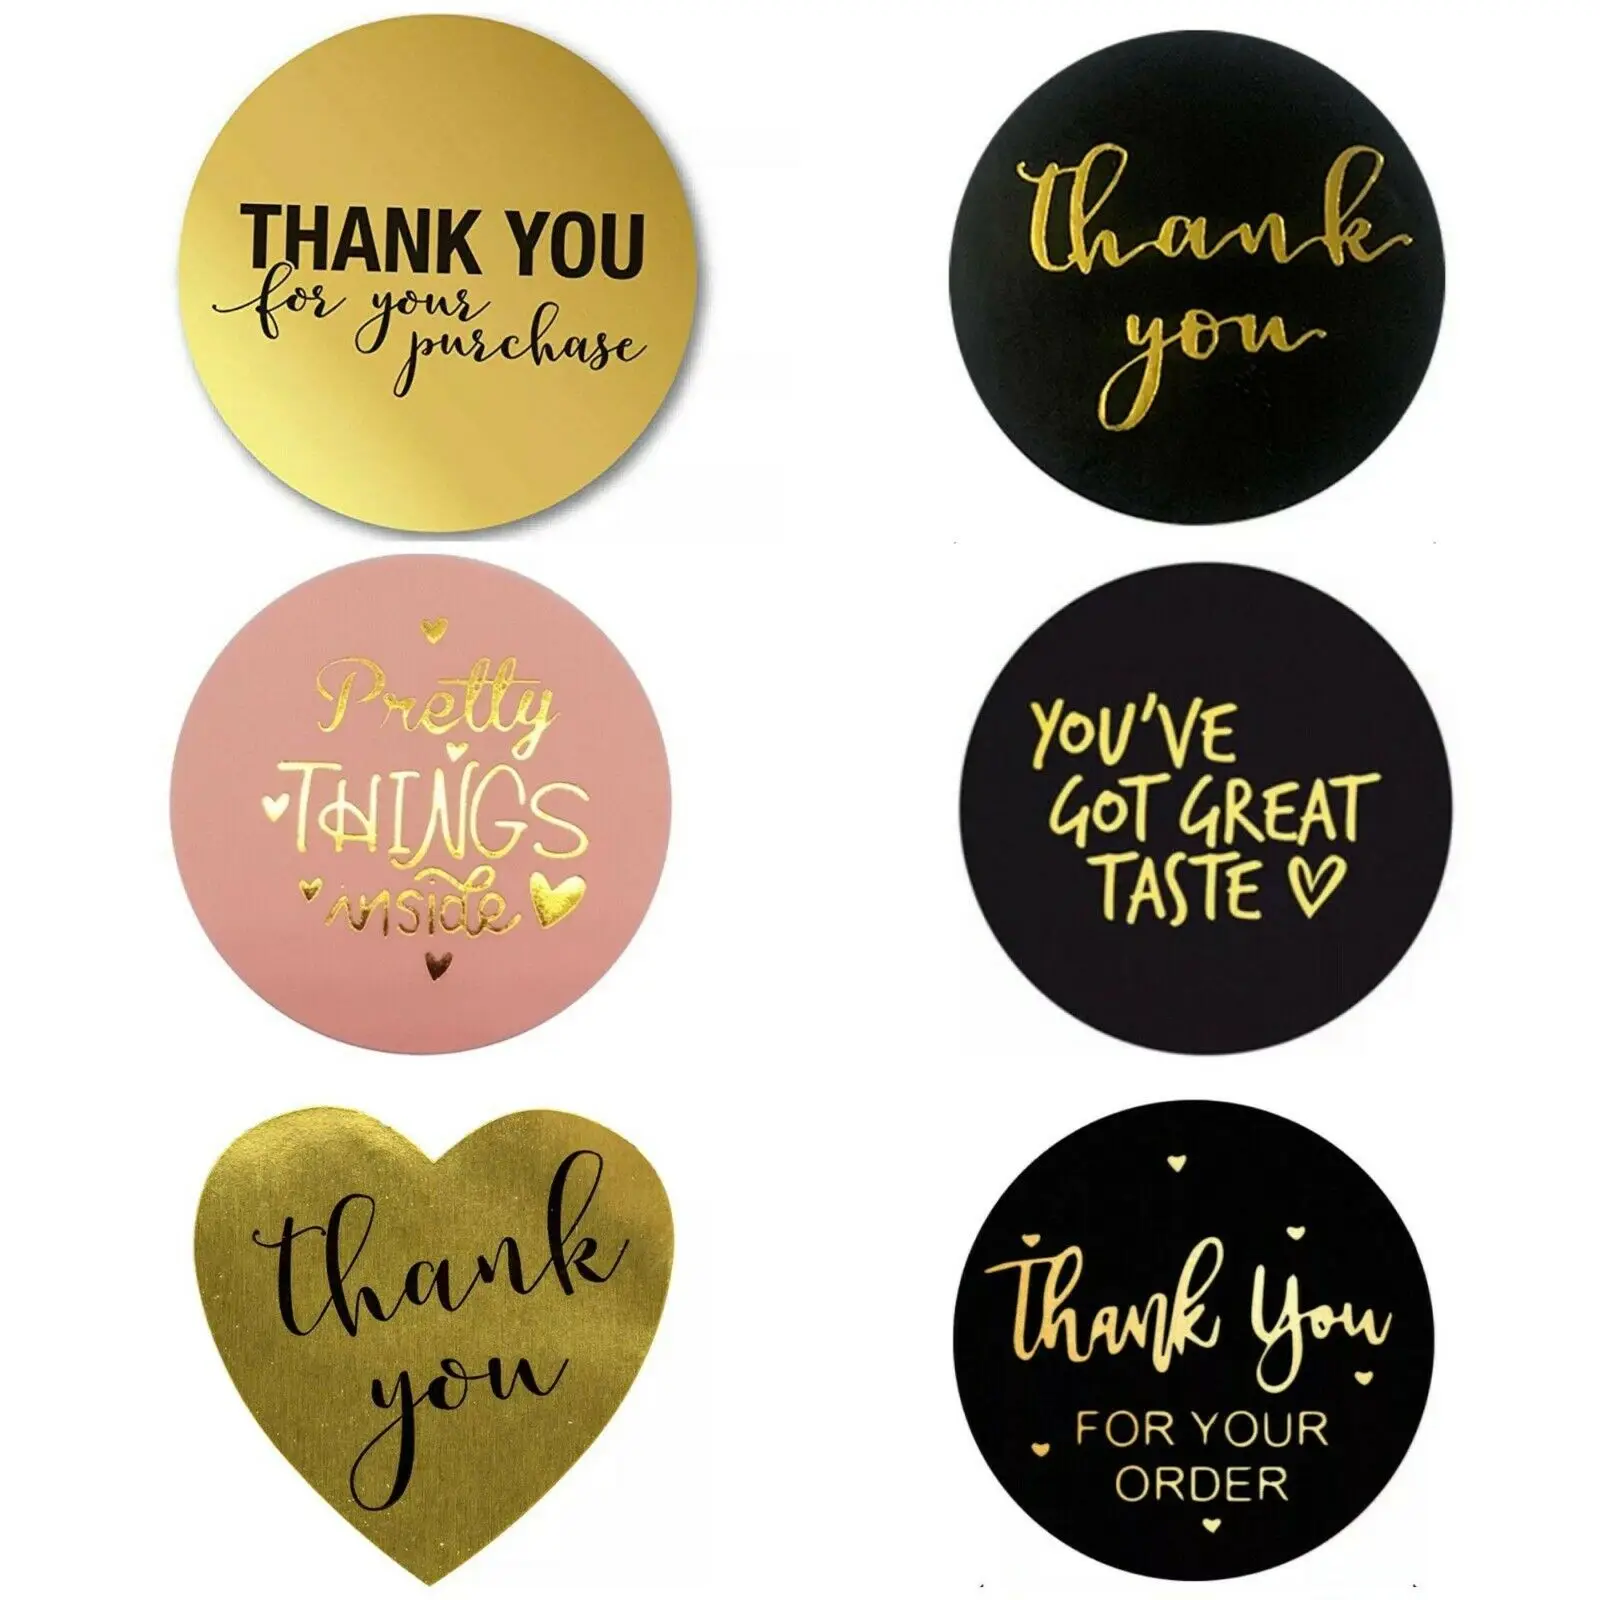 

500pcs Thank You for Your order Sticker Pink Gold Seal Labels You've Got Great Taste Scrapbooking Sticker Pretty things inside